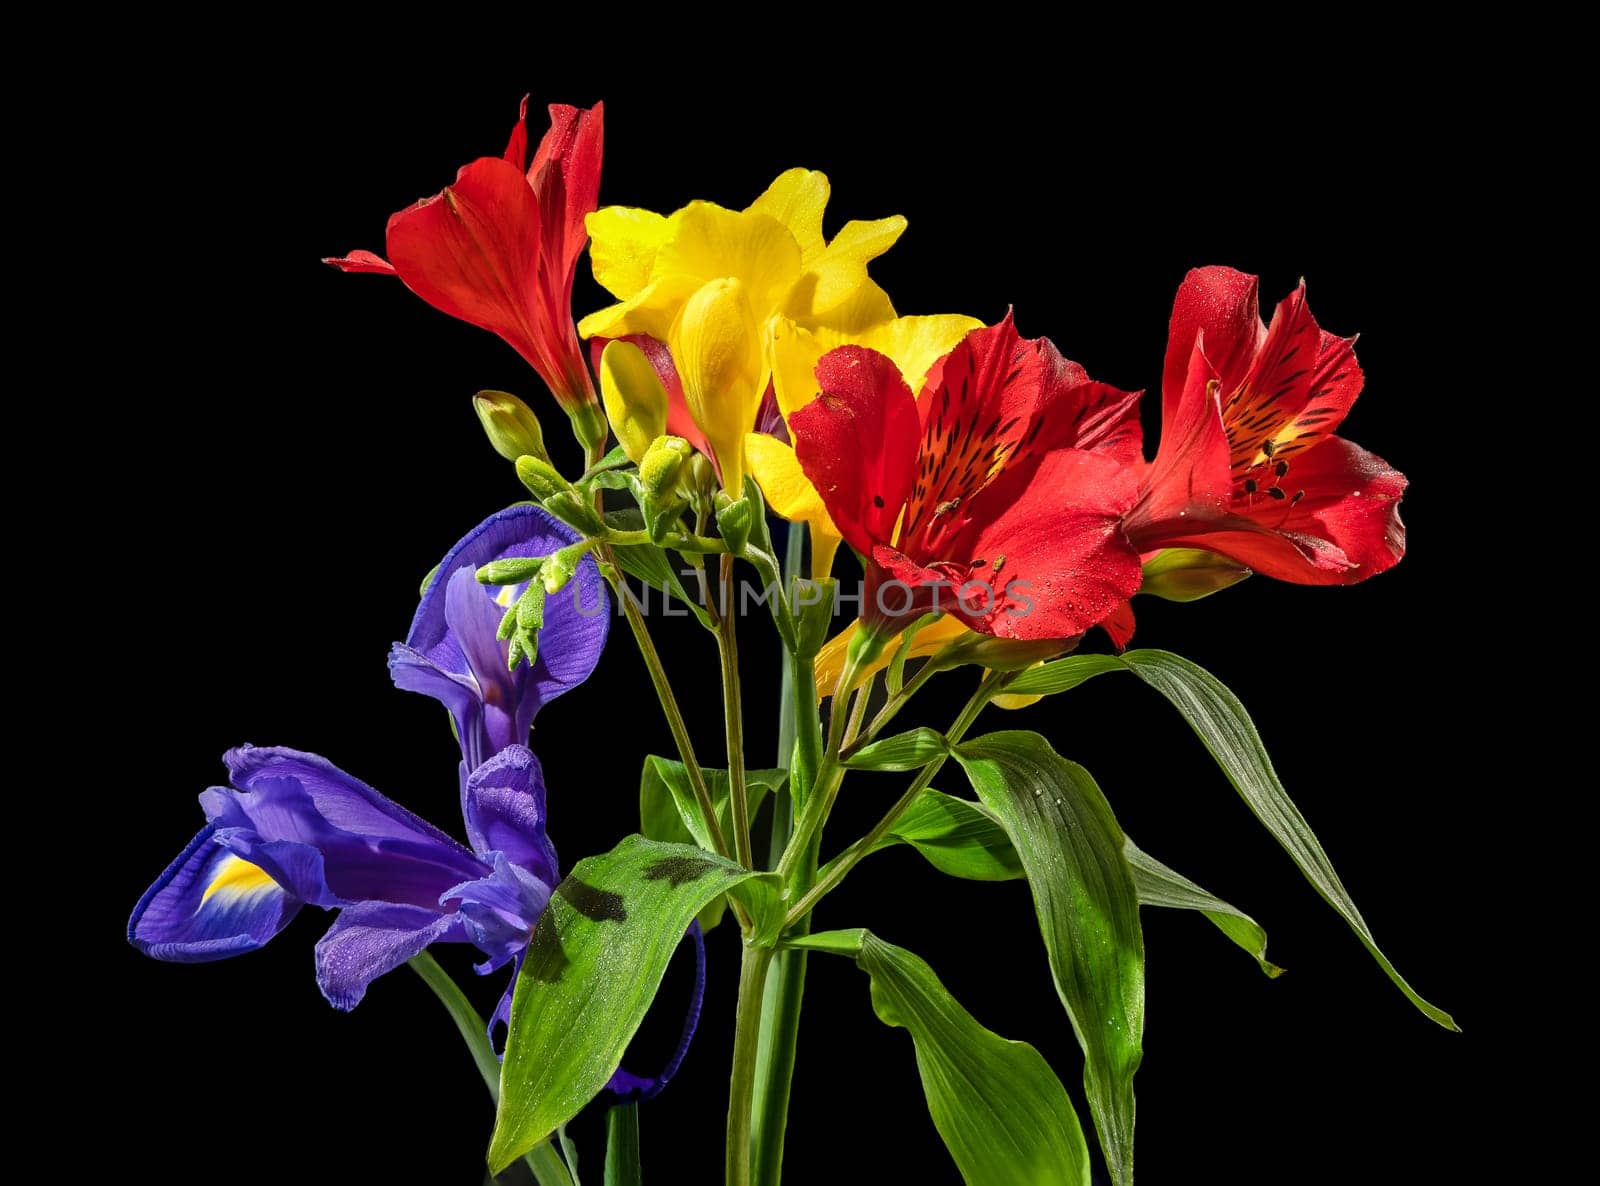 Tricolor bouquet on a black background by Multipedia